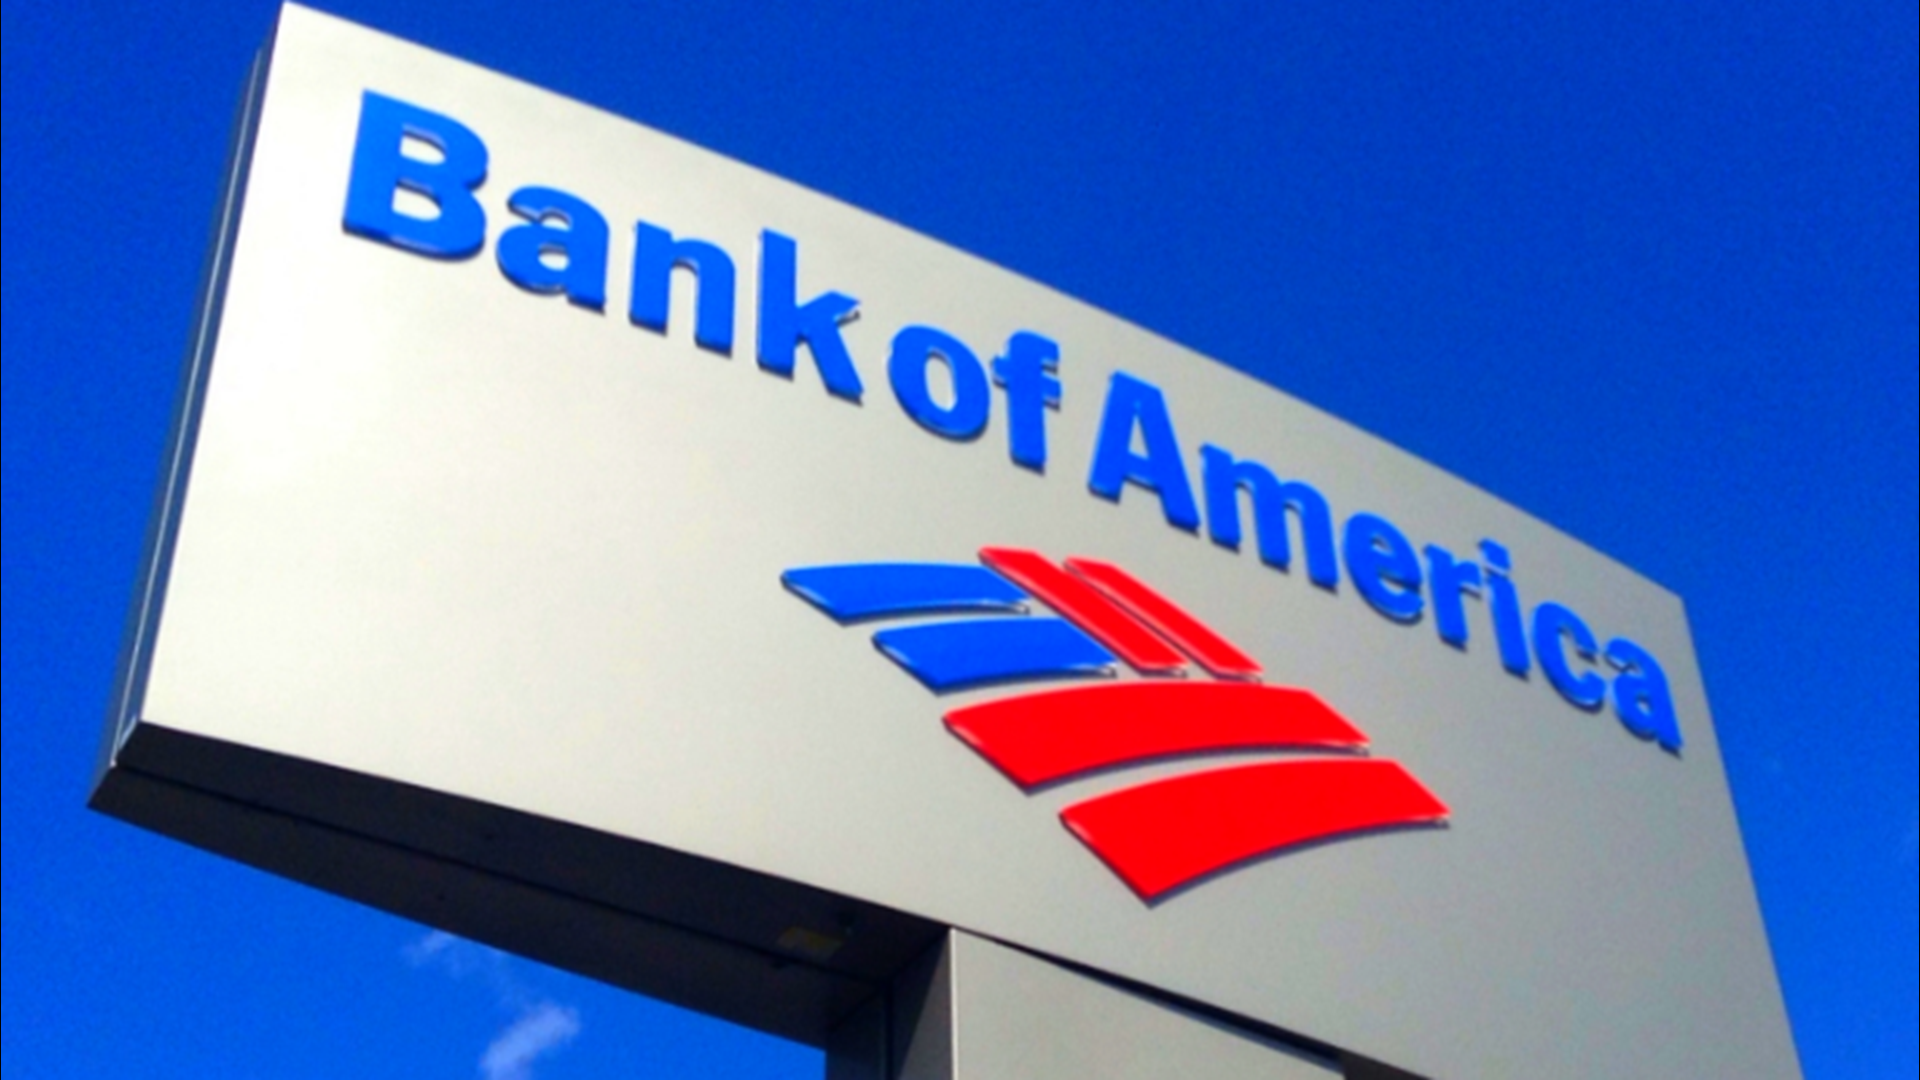 Why are so many local Bank of America branches closed?